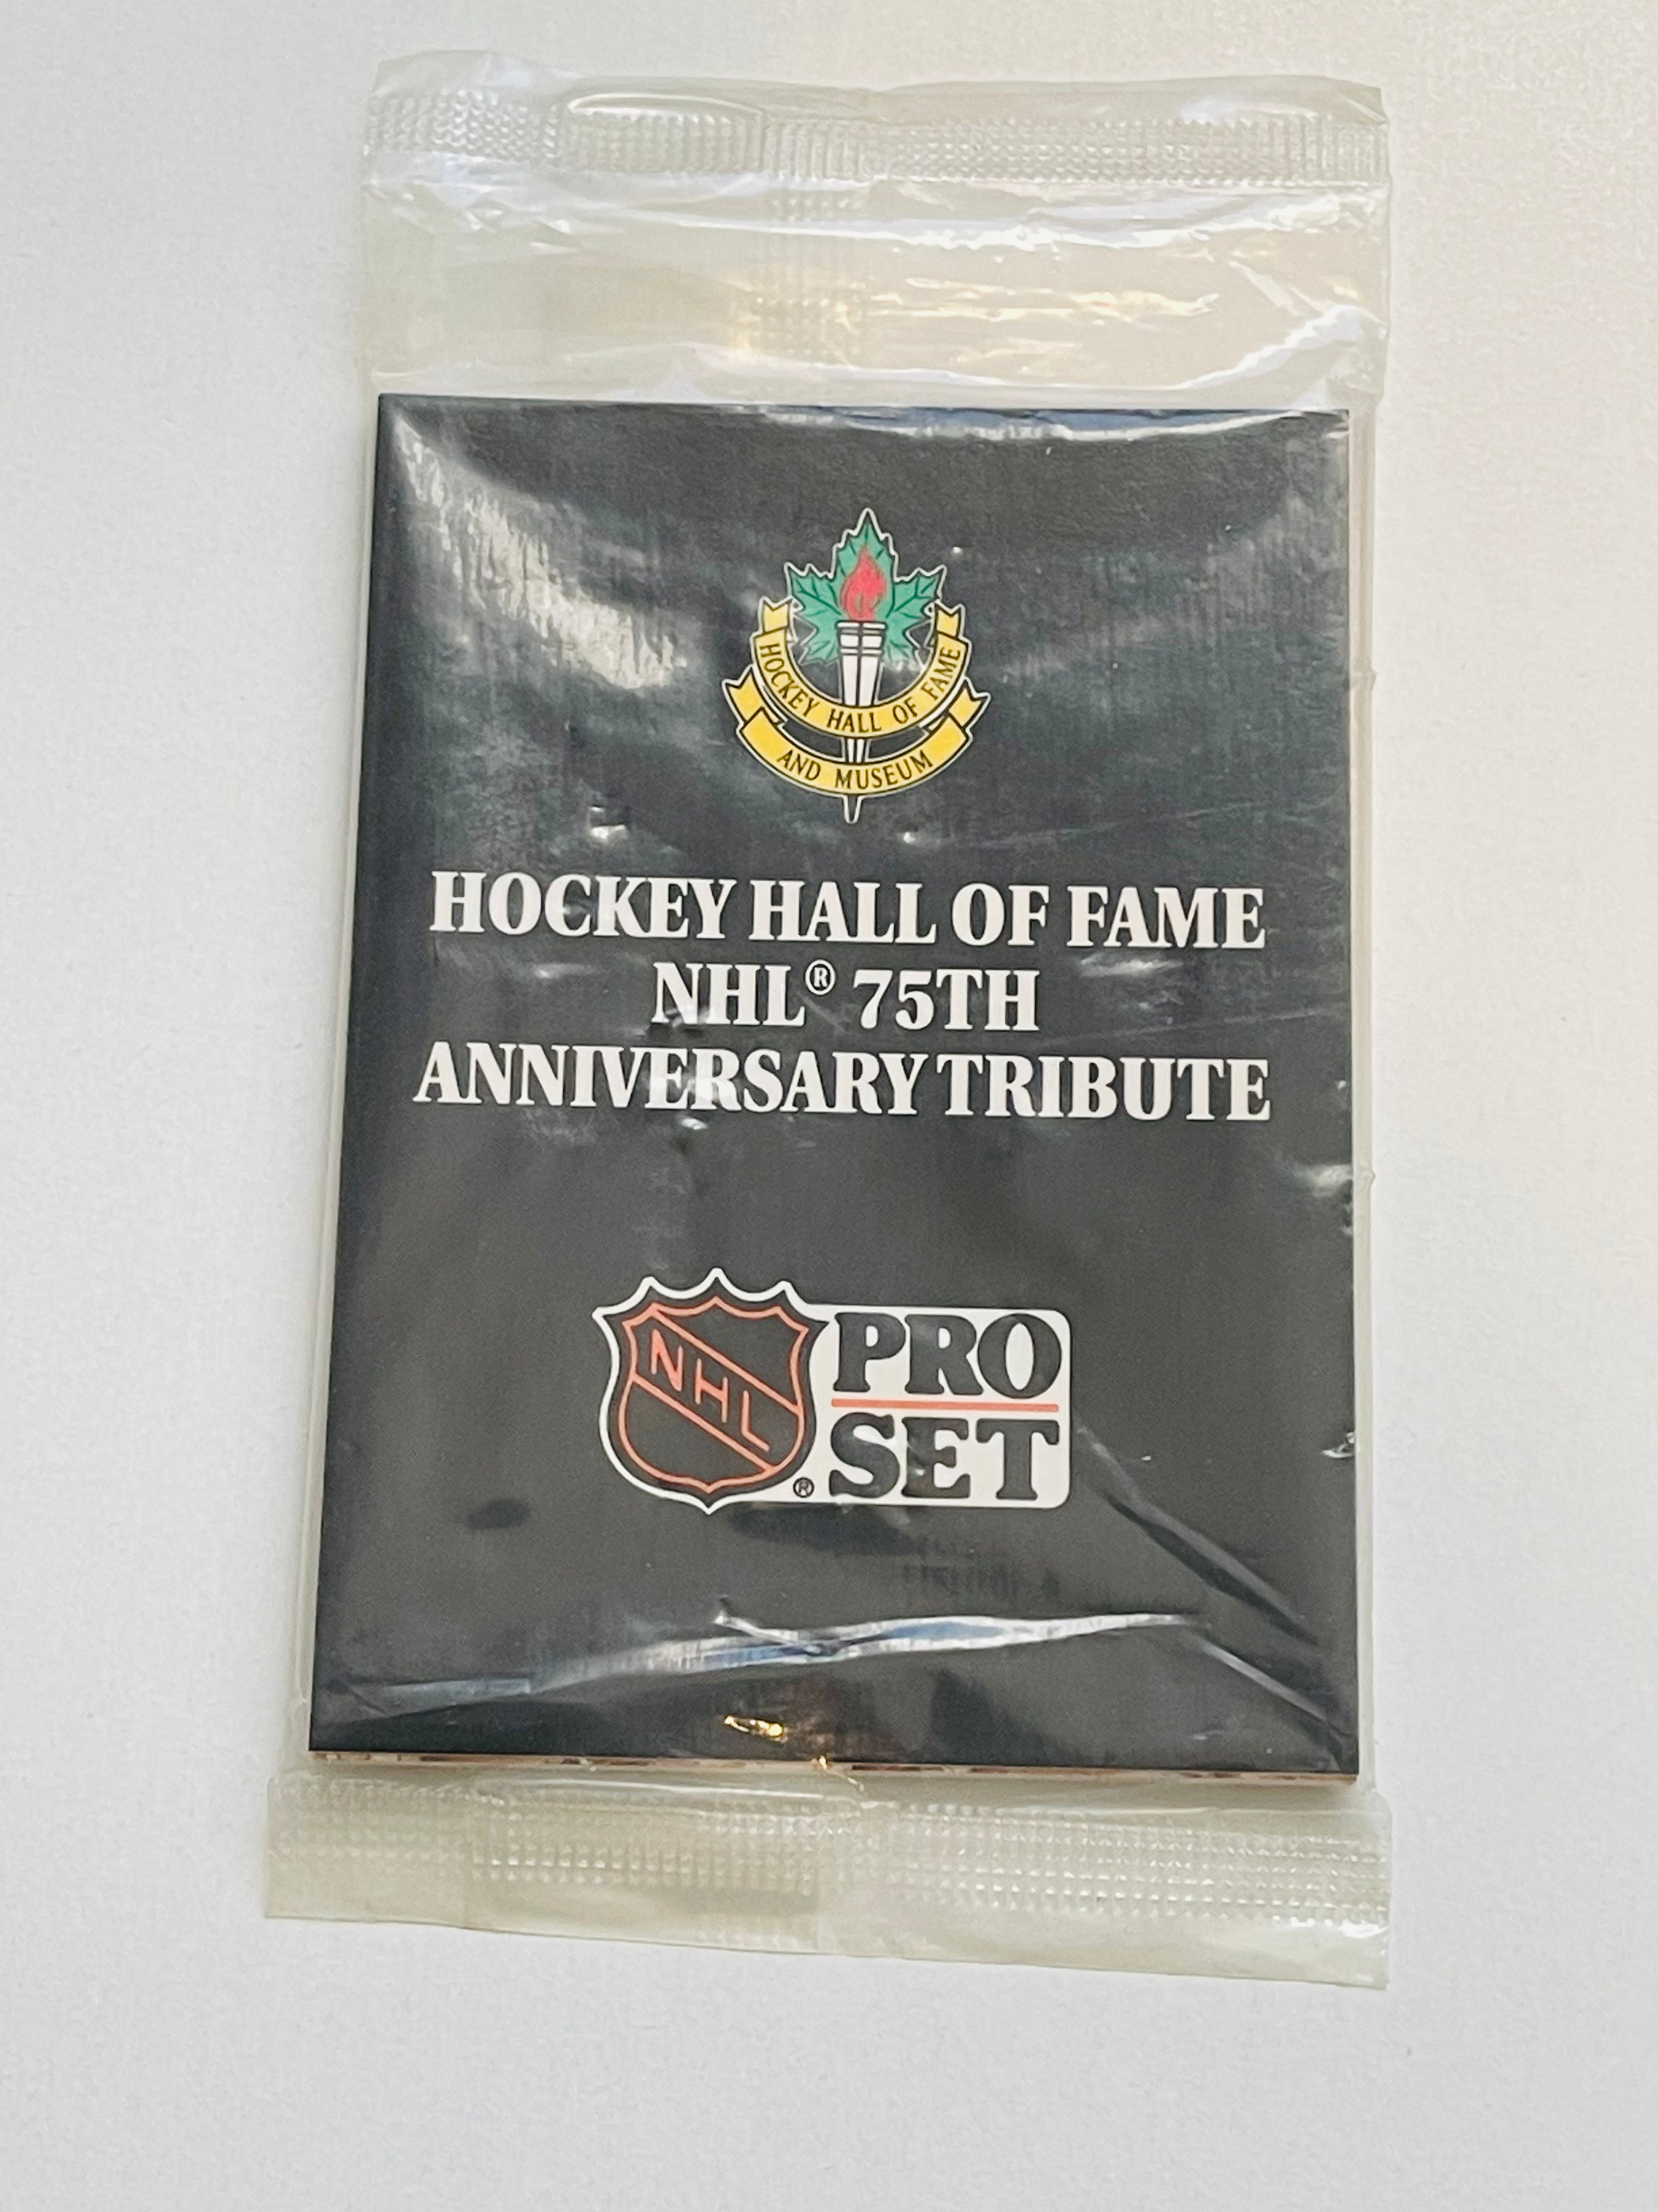 Hockey Hall of Fame Proset factory sealed 75th anniversary pack 1990s